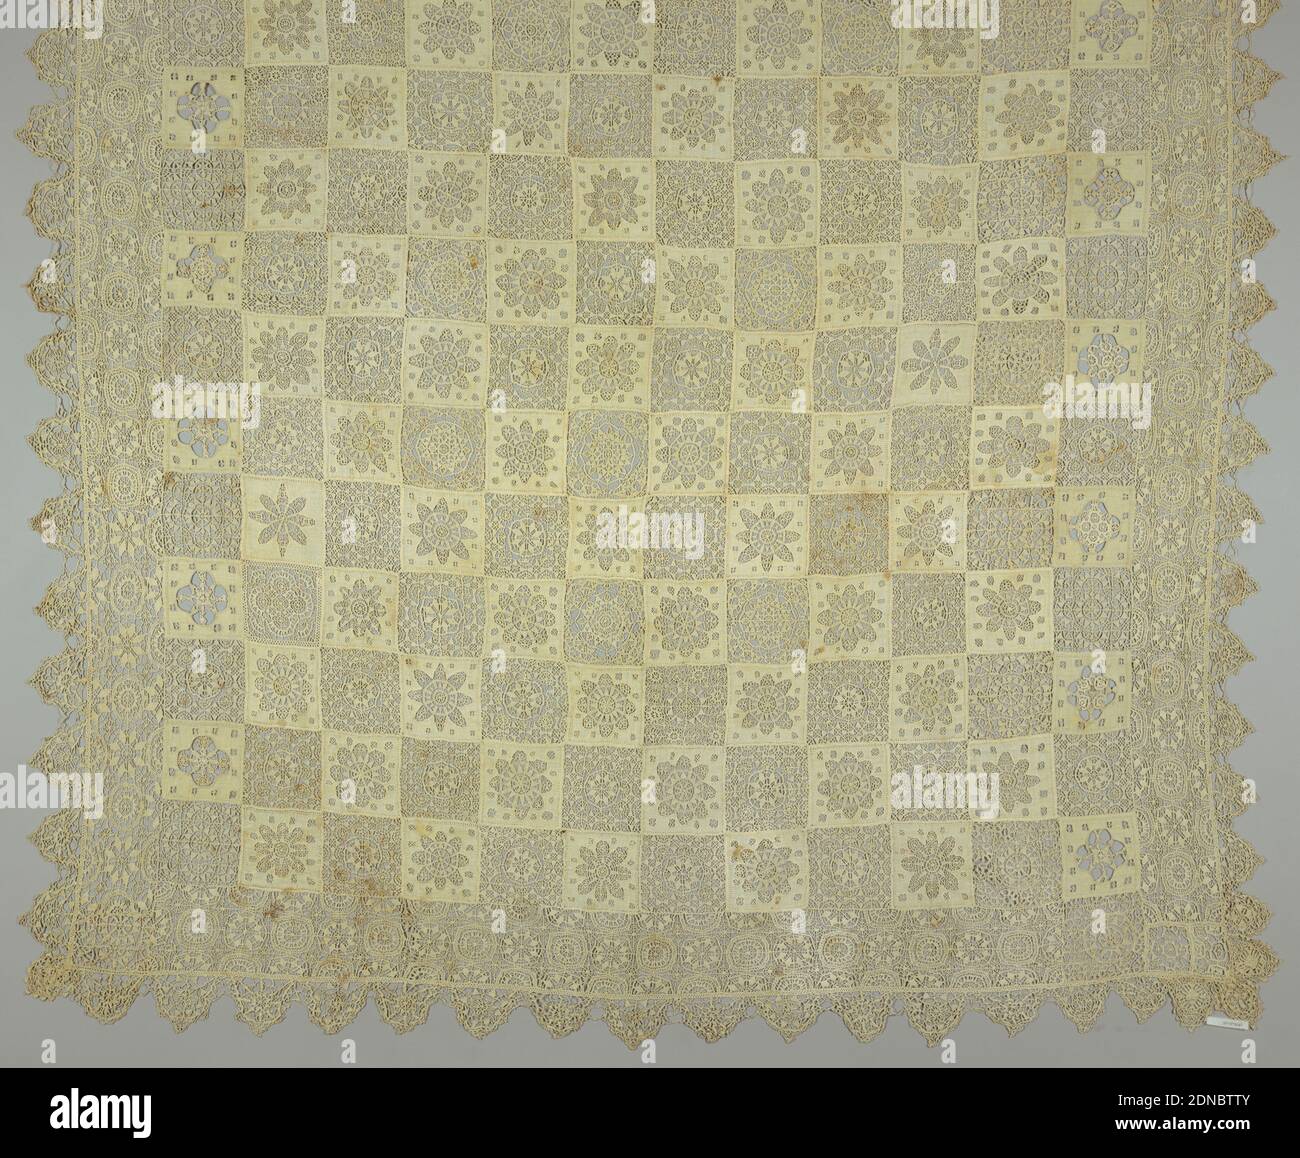 Tablecover, Medium: linen Technique: cutwork, needle lace and needlework on knotted net, Checkerboard arrangement of squares of punto in aria with geometric motifs alternating with squares of fabric which have rosettes cutouts filled in with needlelace. Border of punto in aria. Scalloped needlelace edging., Europe, 19th century, lace, Tablecover Stock Photo